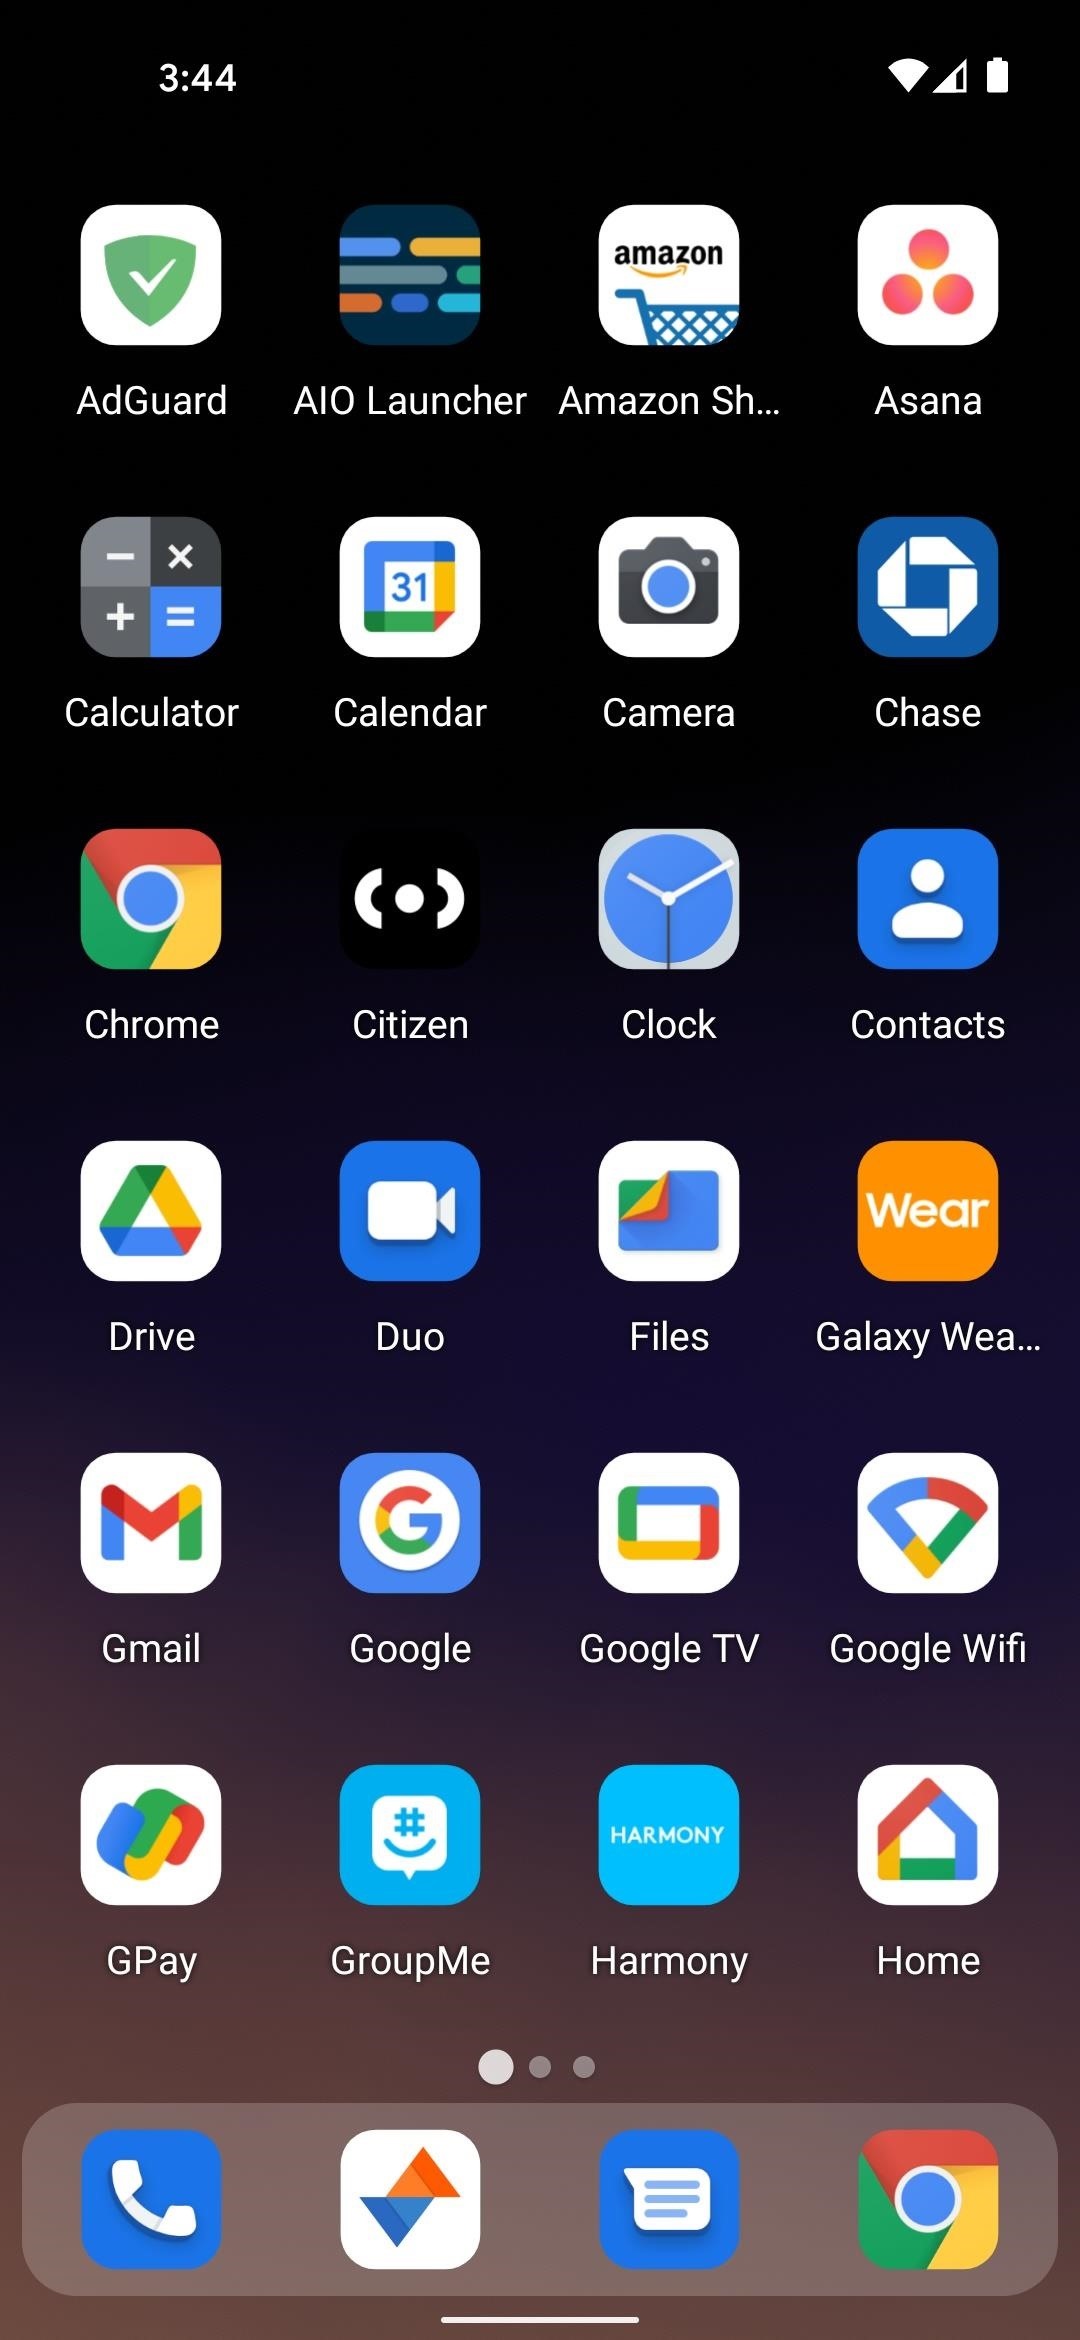 9 Fresh New Android Launchers to Replace Your Boring Home Screen (2021 Edition)